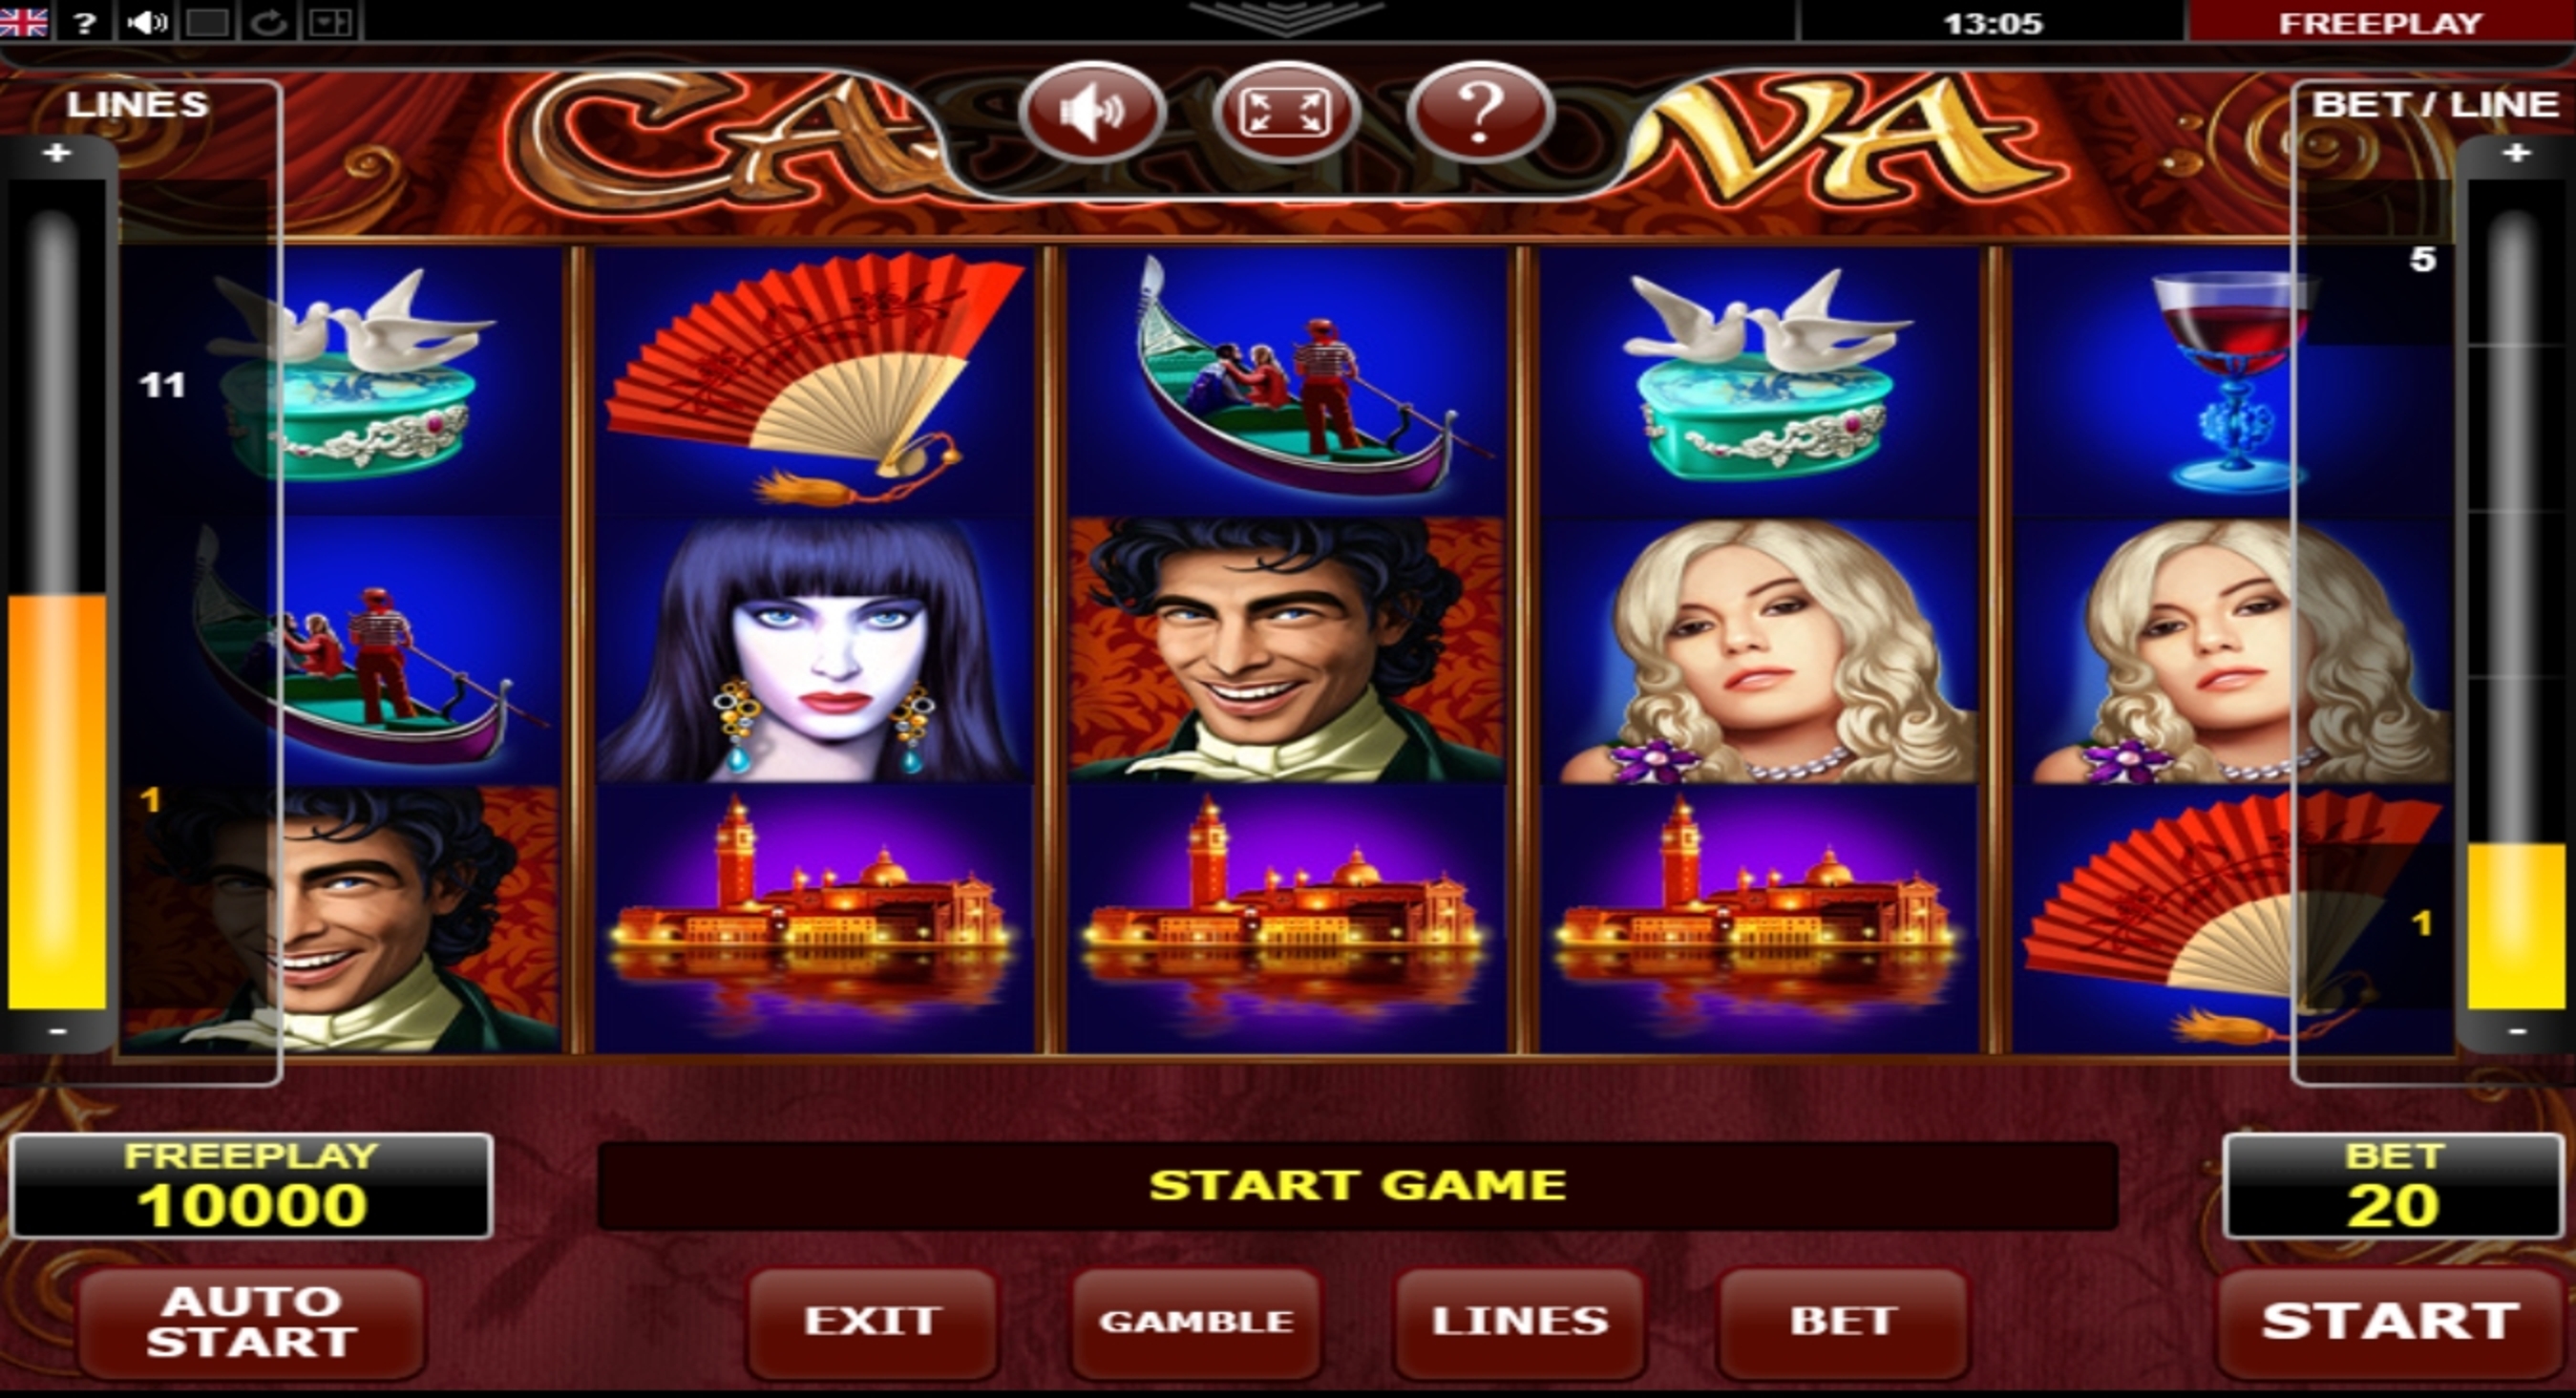 Reels in Casanova Slot Game by Amatic Industries